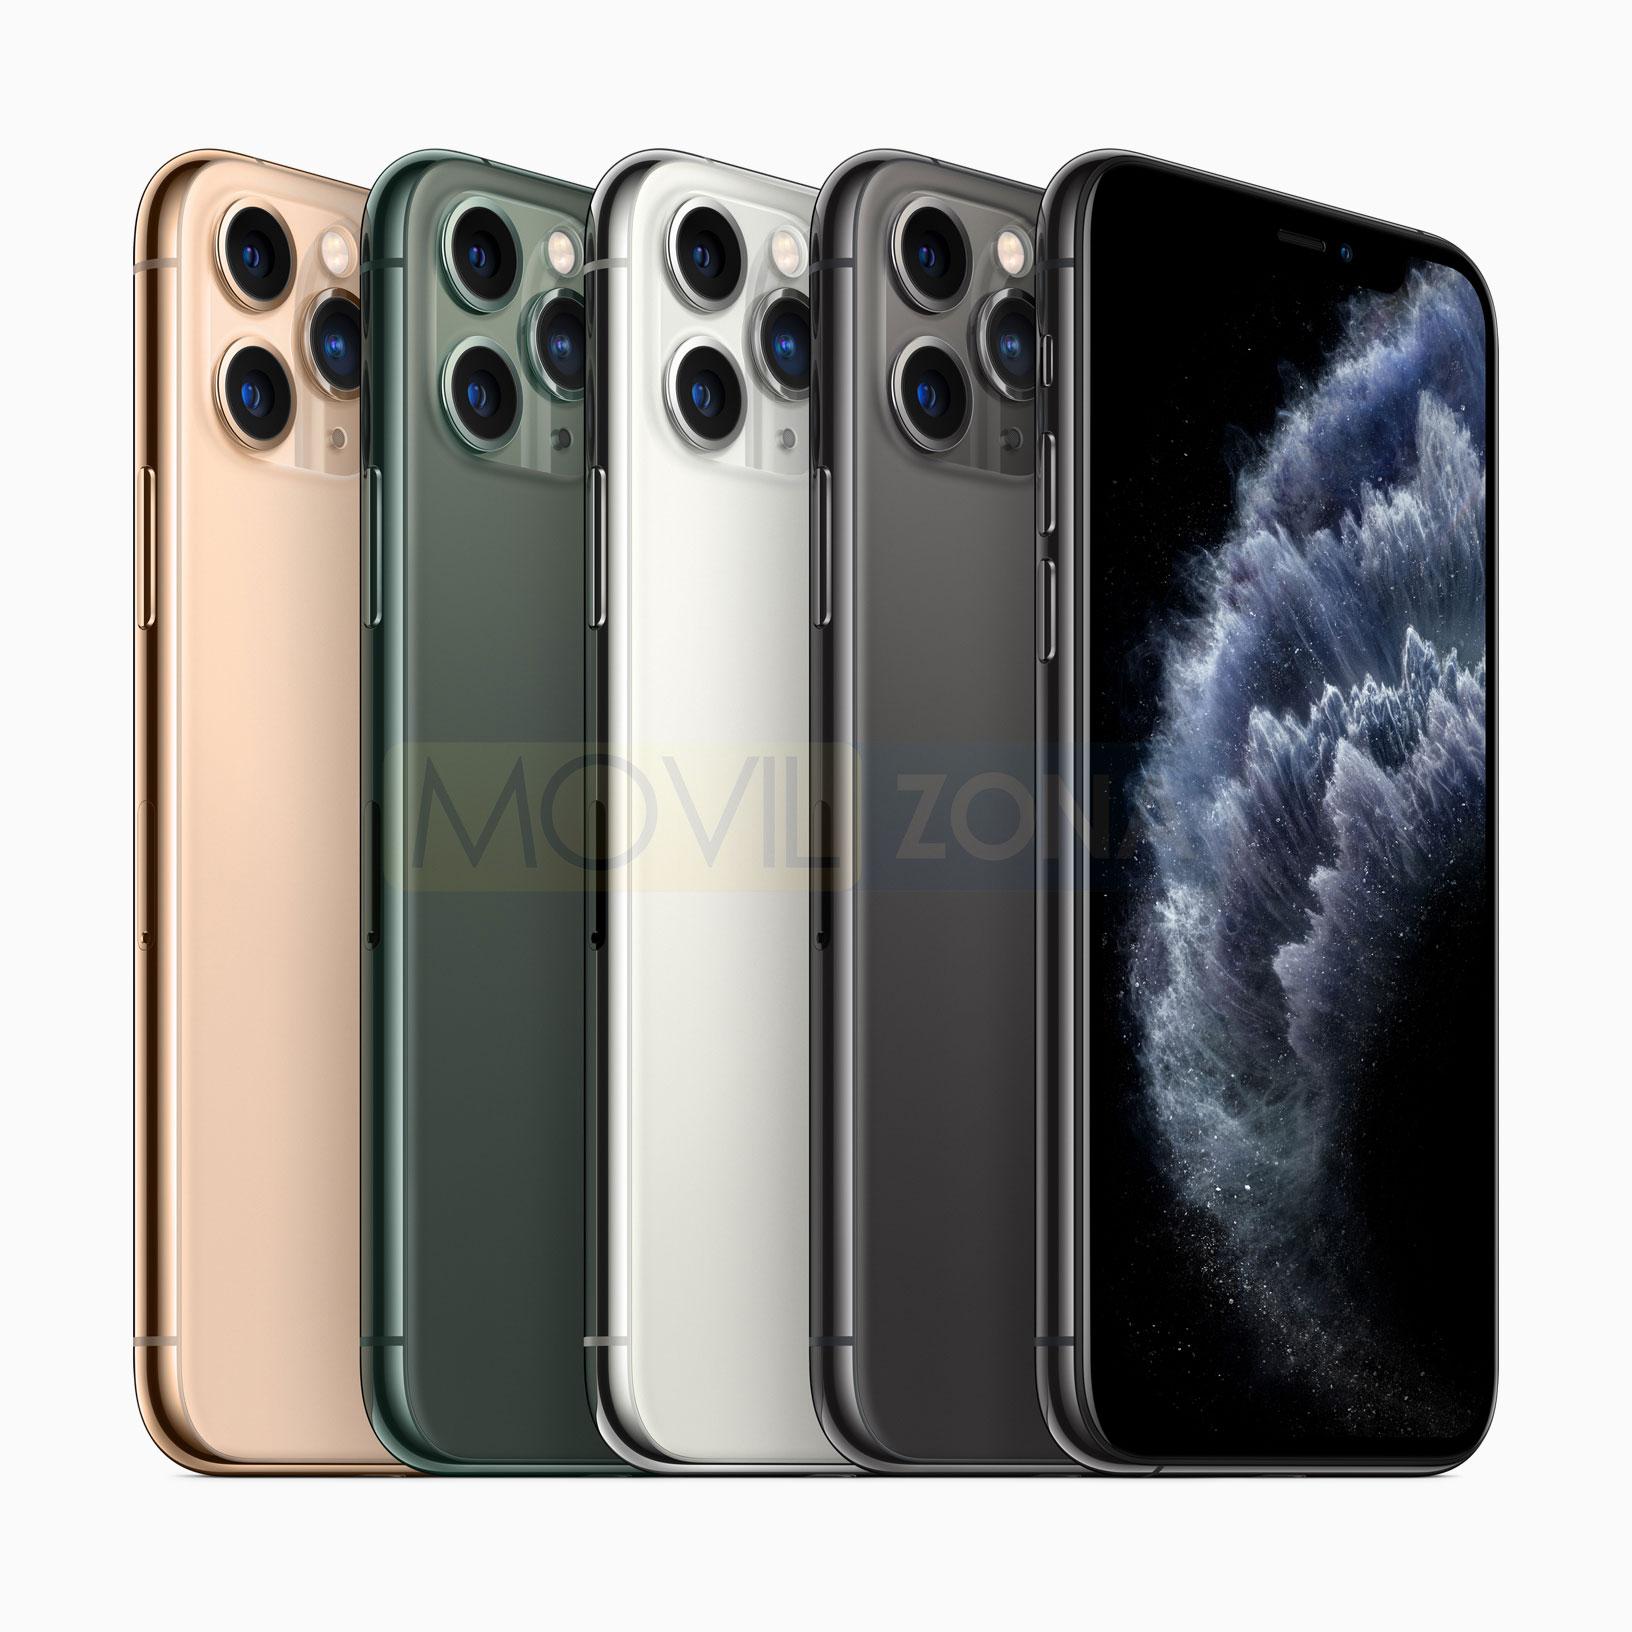 Apple iPhone 11 Pro colores